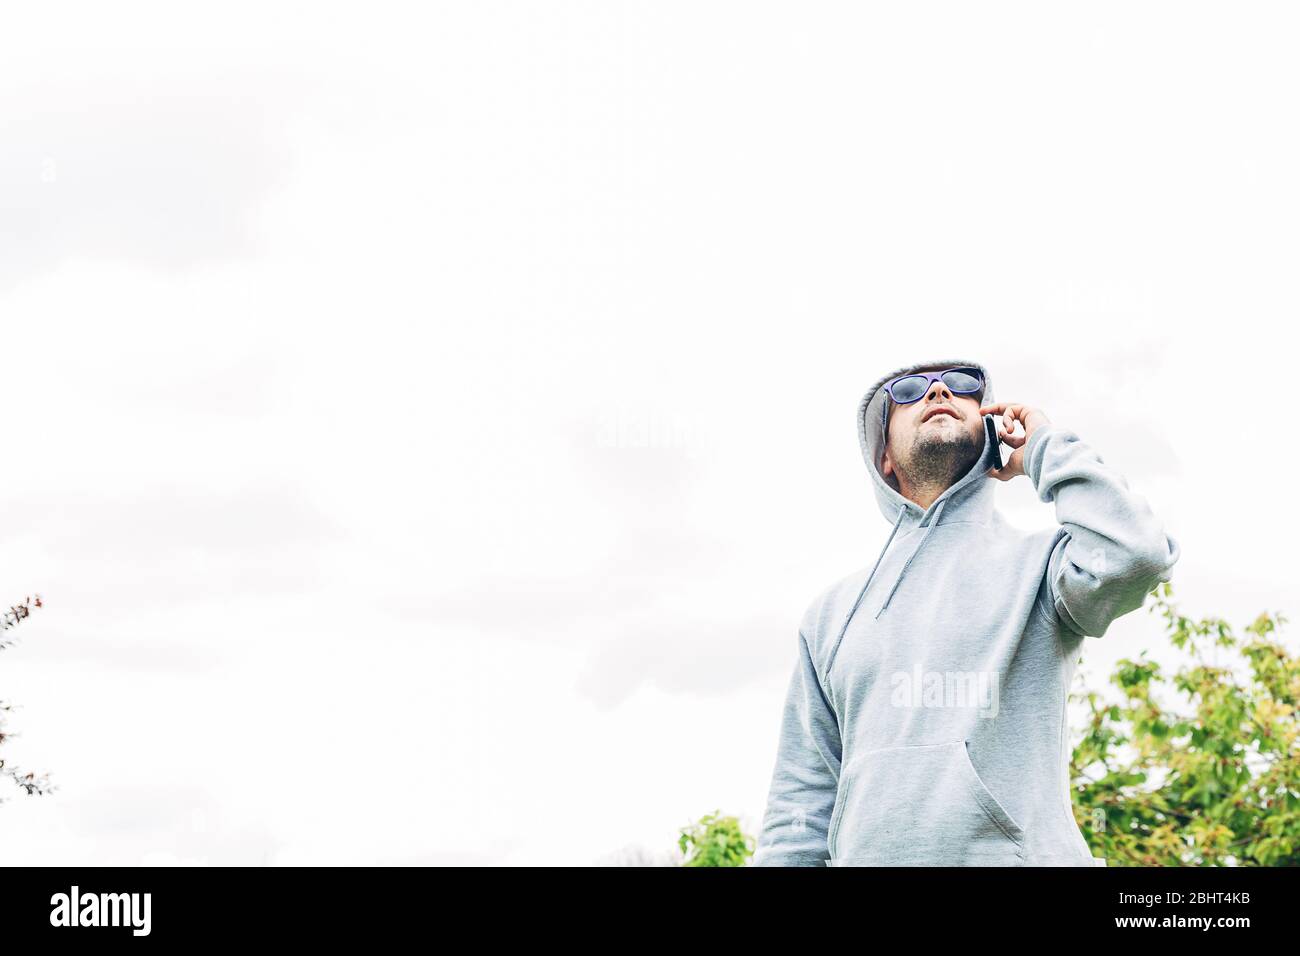 Young man in gray sweatshirt and blue sunglasses holding cell phone in his hands looking up Stock Photo